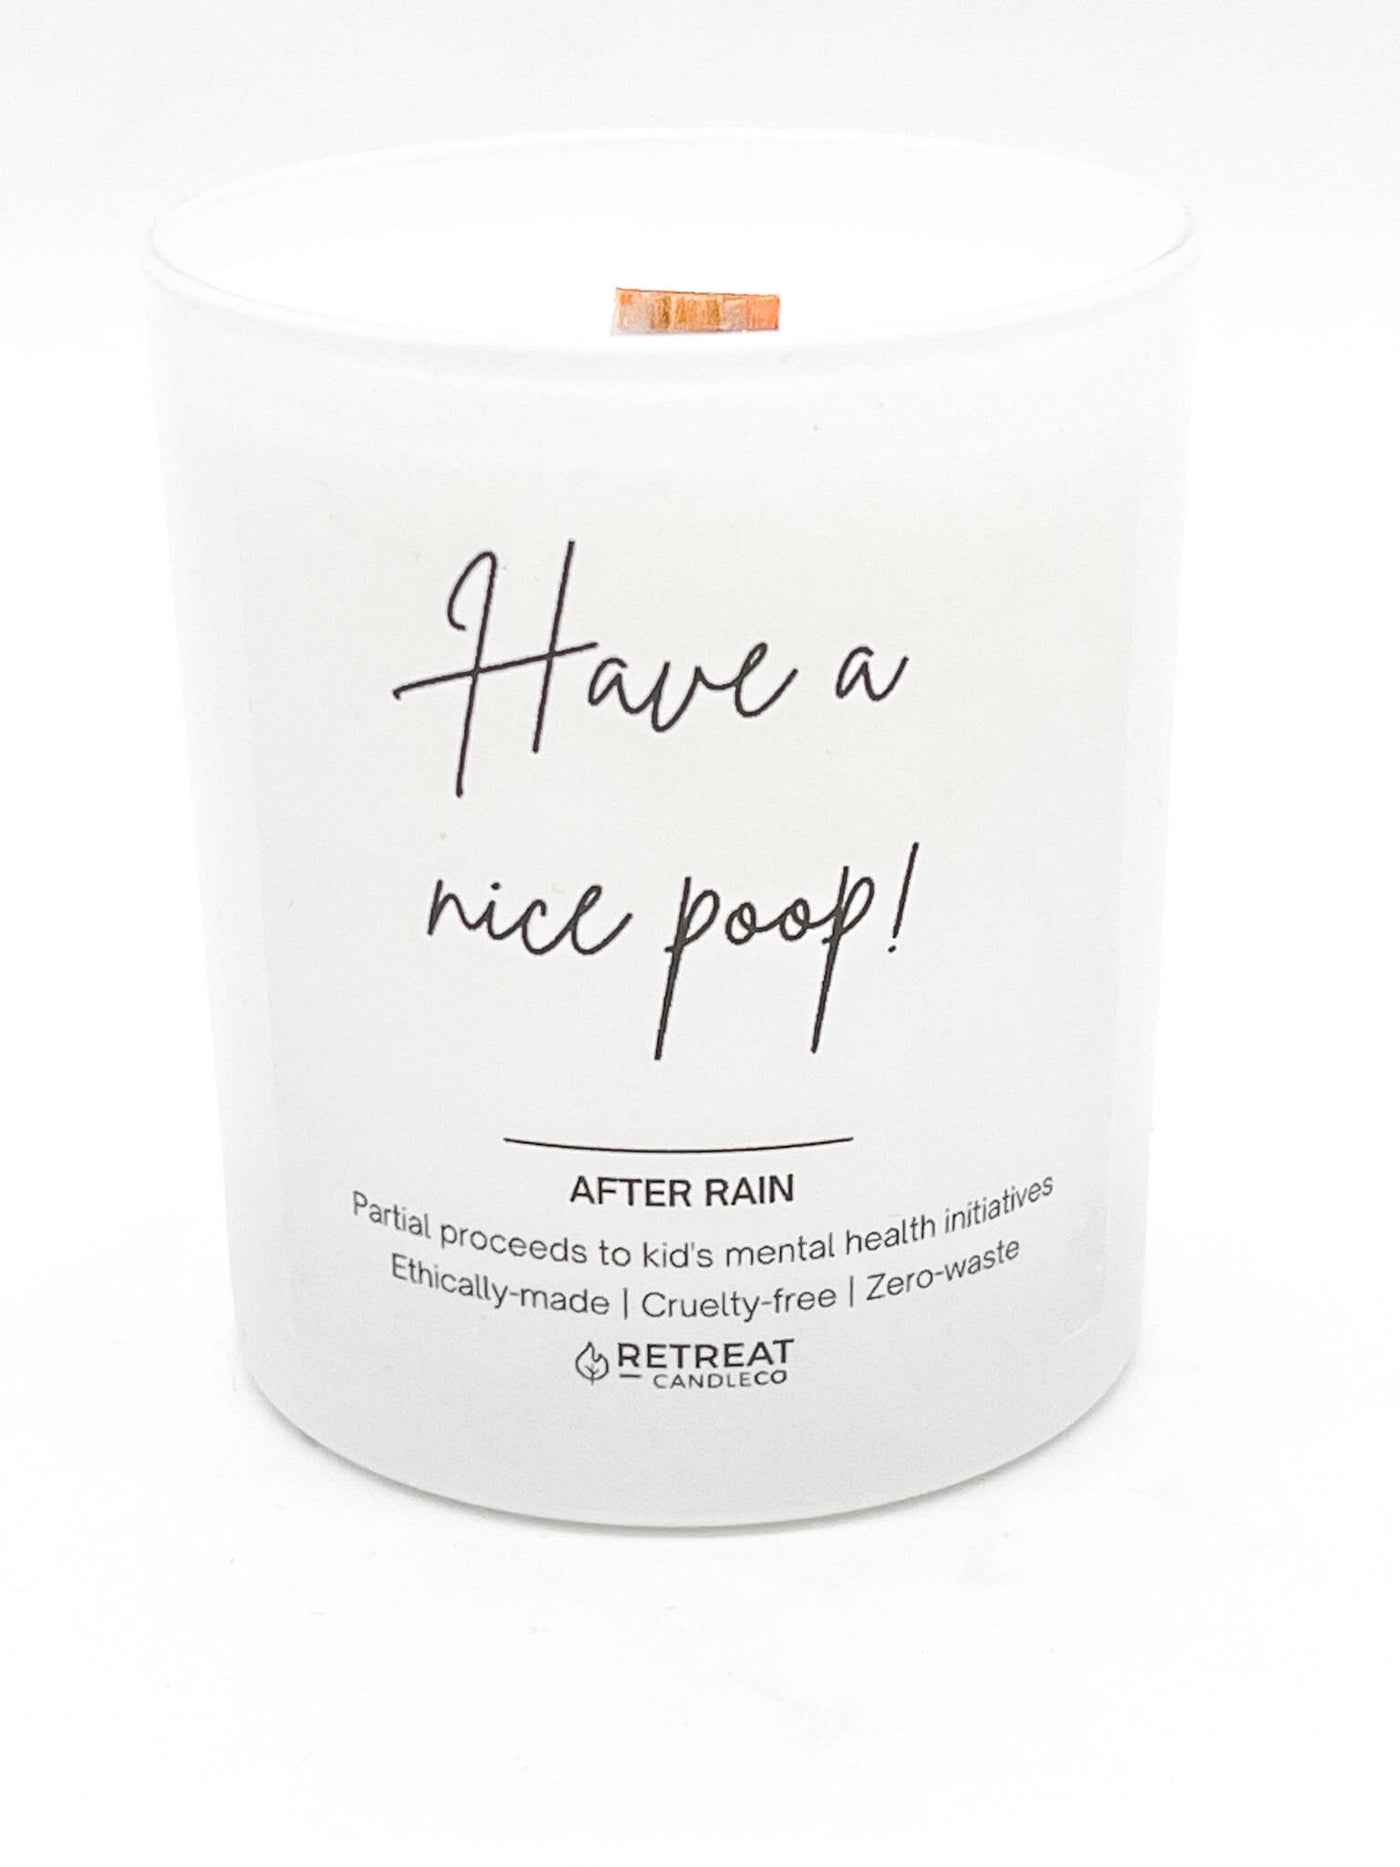 Have a Nice Poop Candle